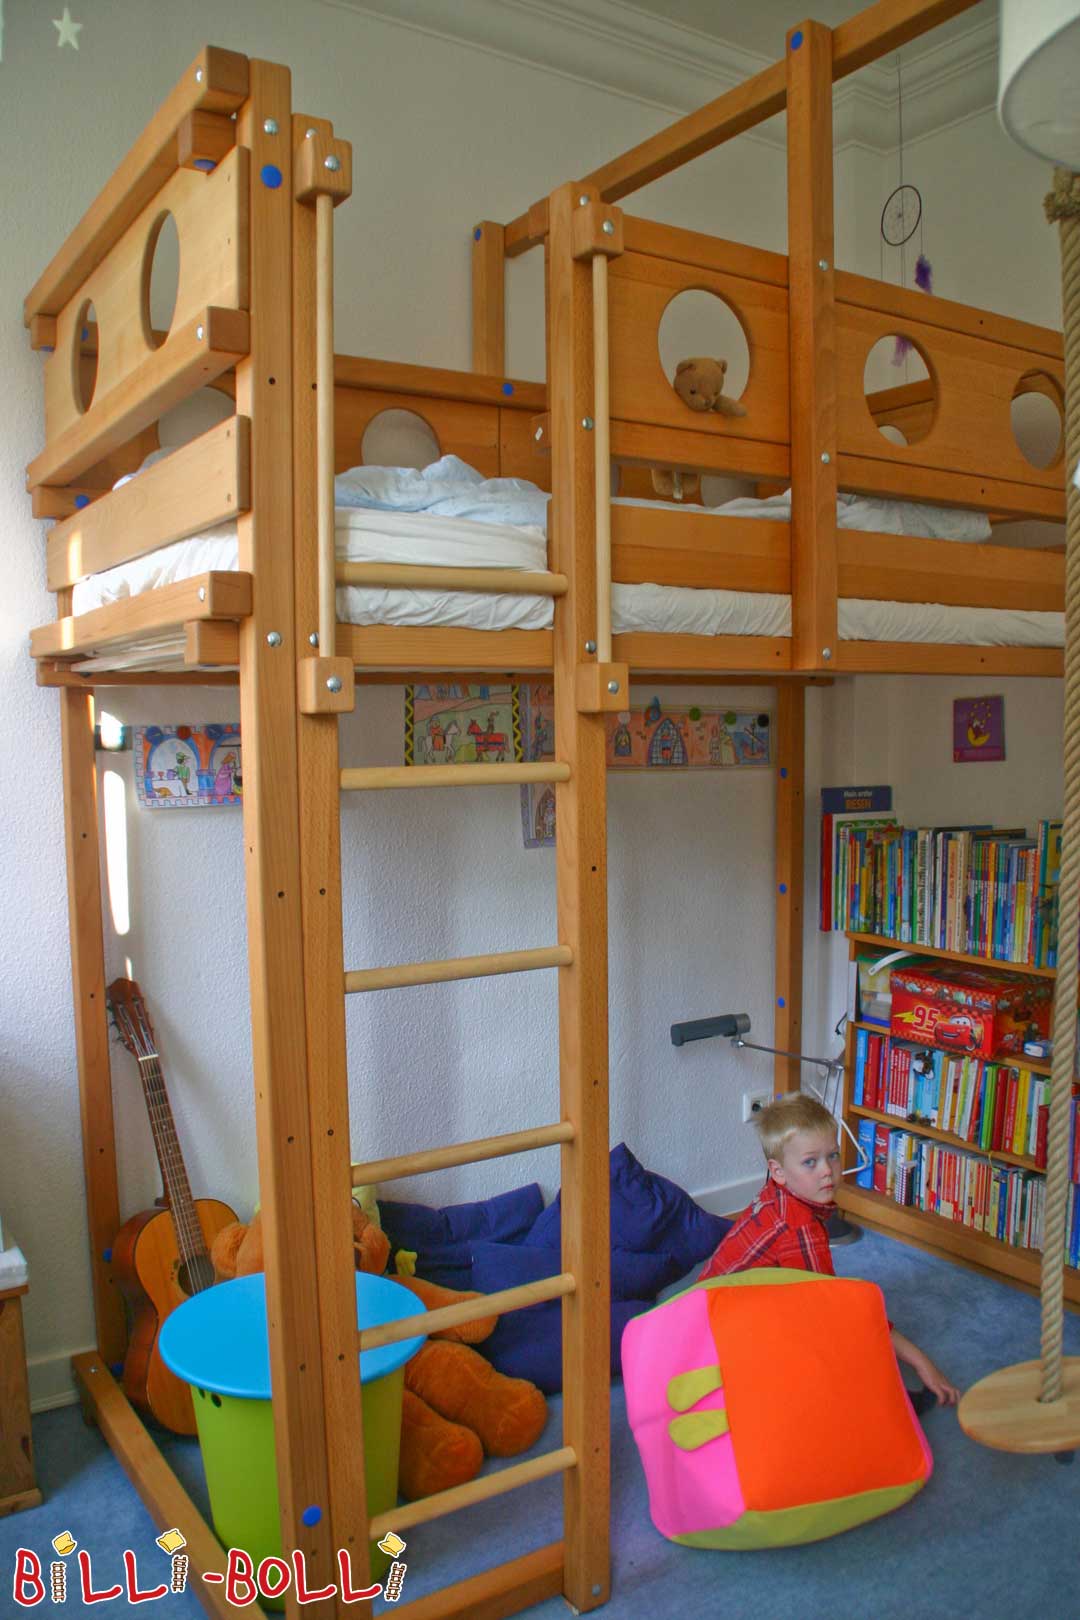 Growing loft bed with high fall protection at installation height 6 (Category: second hand loft bed)